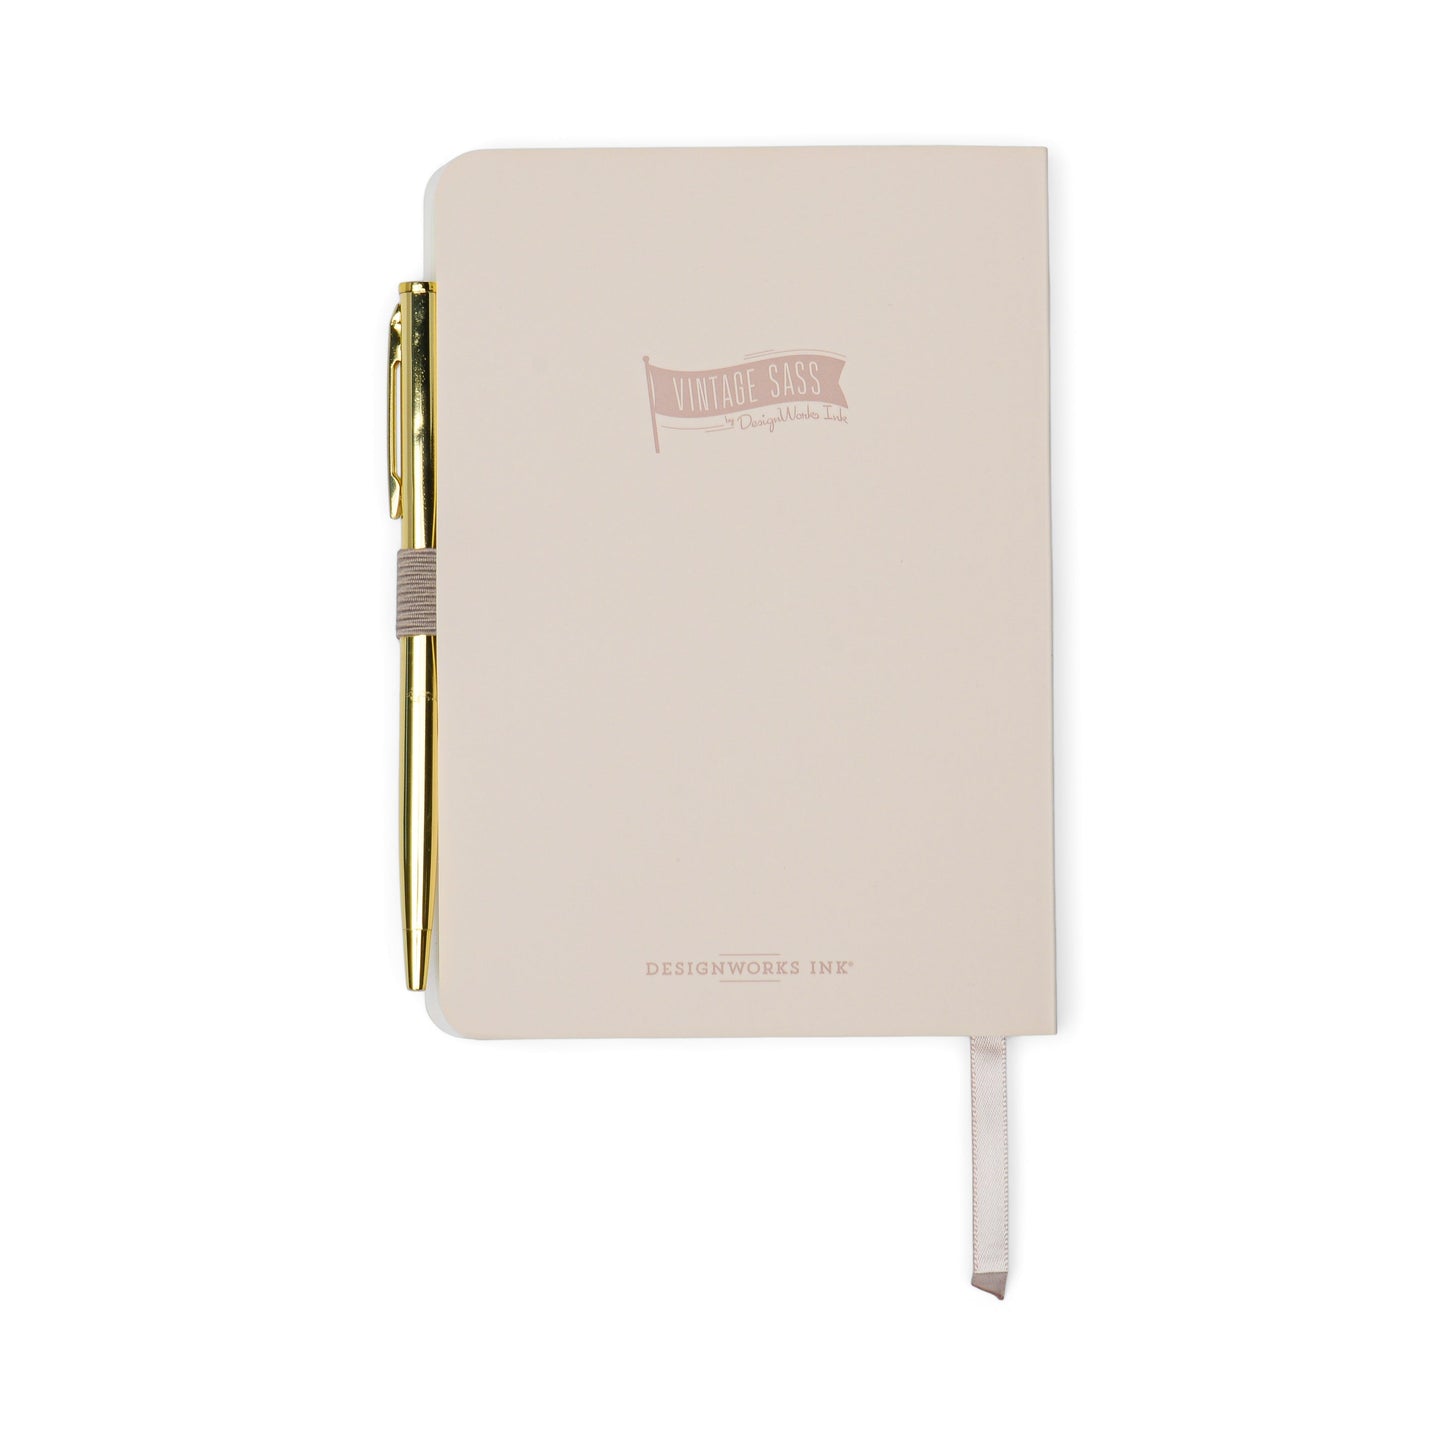 Vintage Sass Notebook with Pen - Shittake Happens